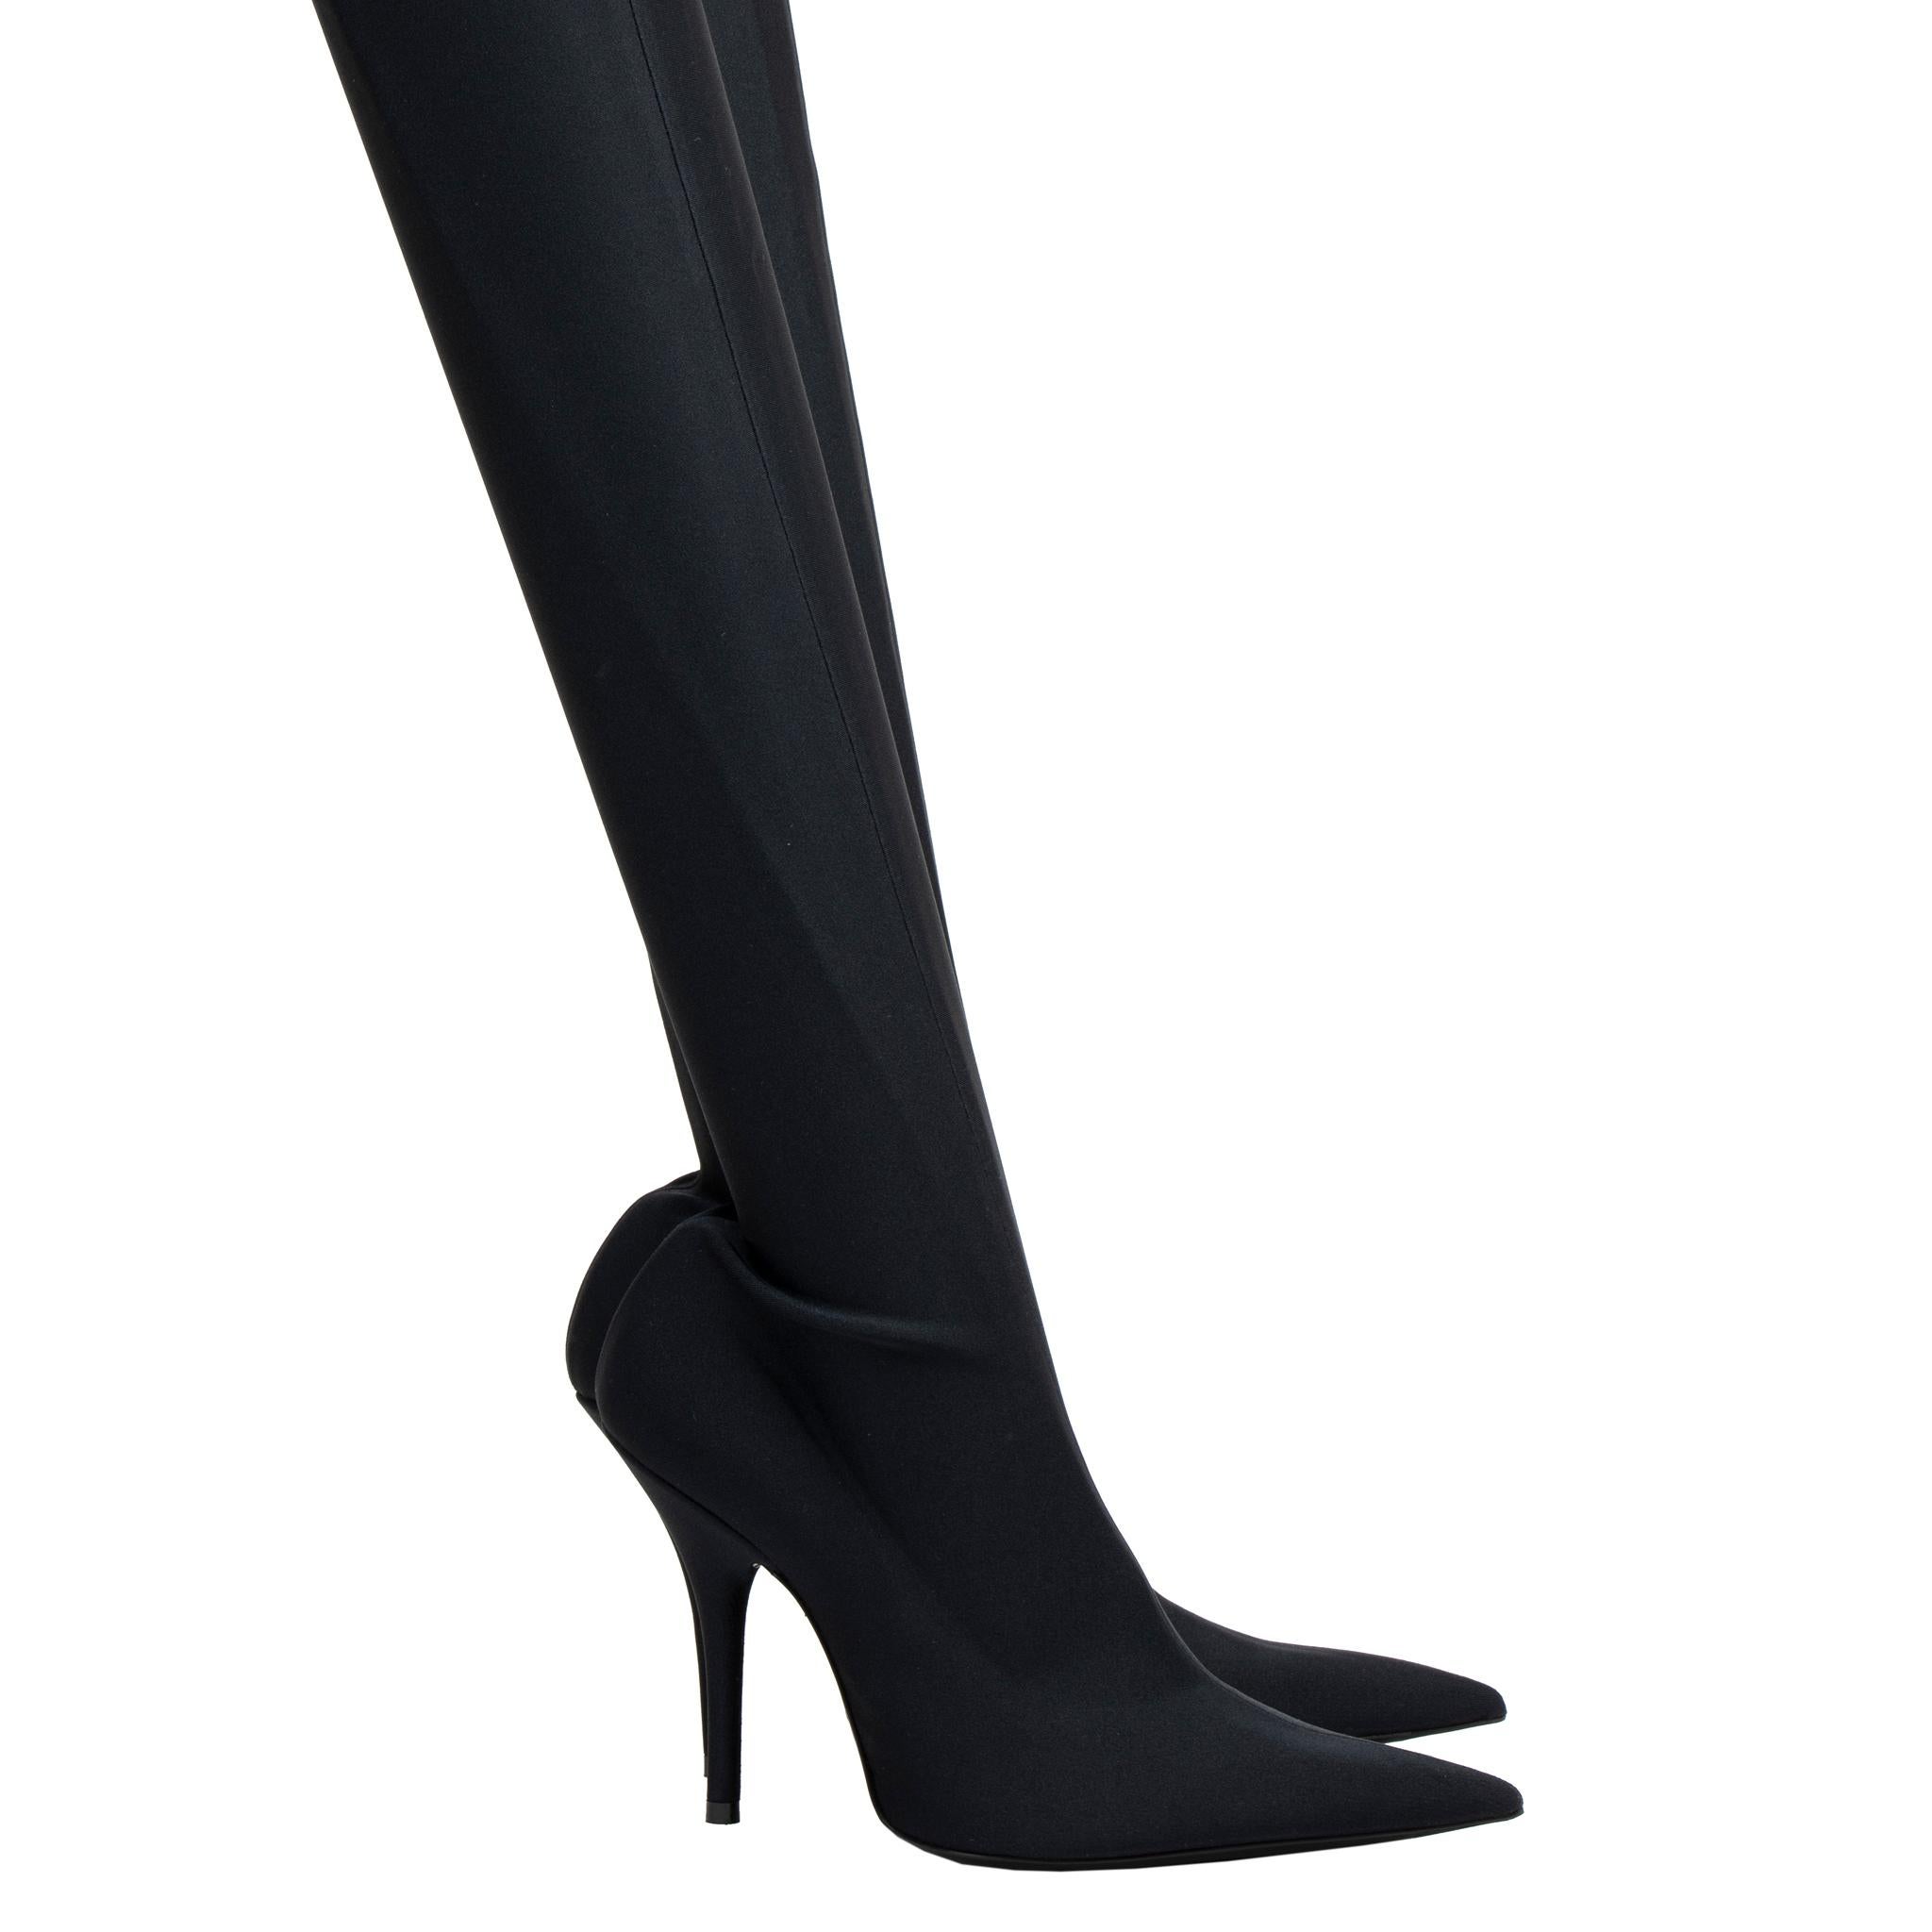 Brand:

Balenciaga

Product:

Stretch Knit Knife Thigh High Boot

Size:

36 Fr

Colour:

Black

Heel:

11.5 Cm

Shaft Height:

71 Cm

Width

24 Cm

Material:

Stretch Knit: 65% Viscose, 30% Poloammide, 5% Elastan

Condition:

Preloved; Very